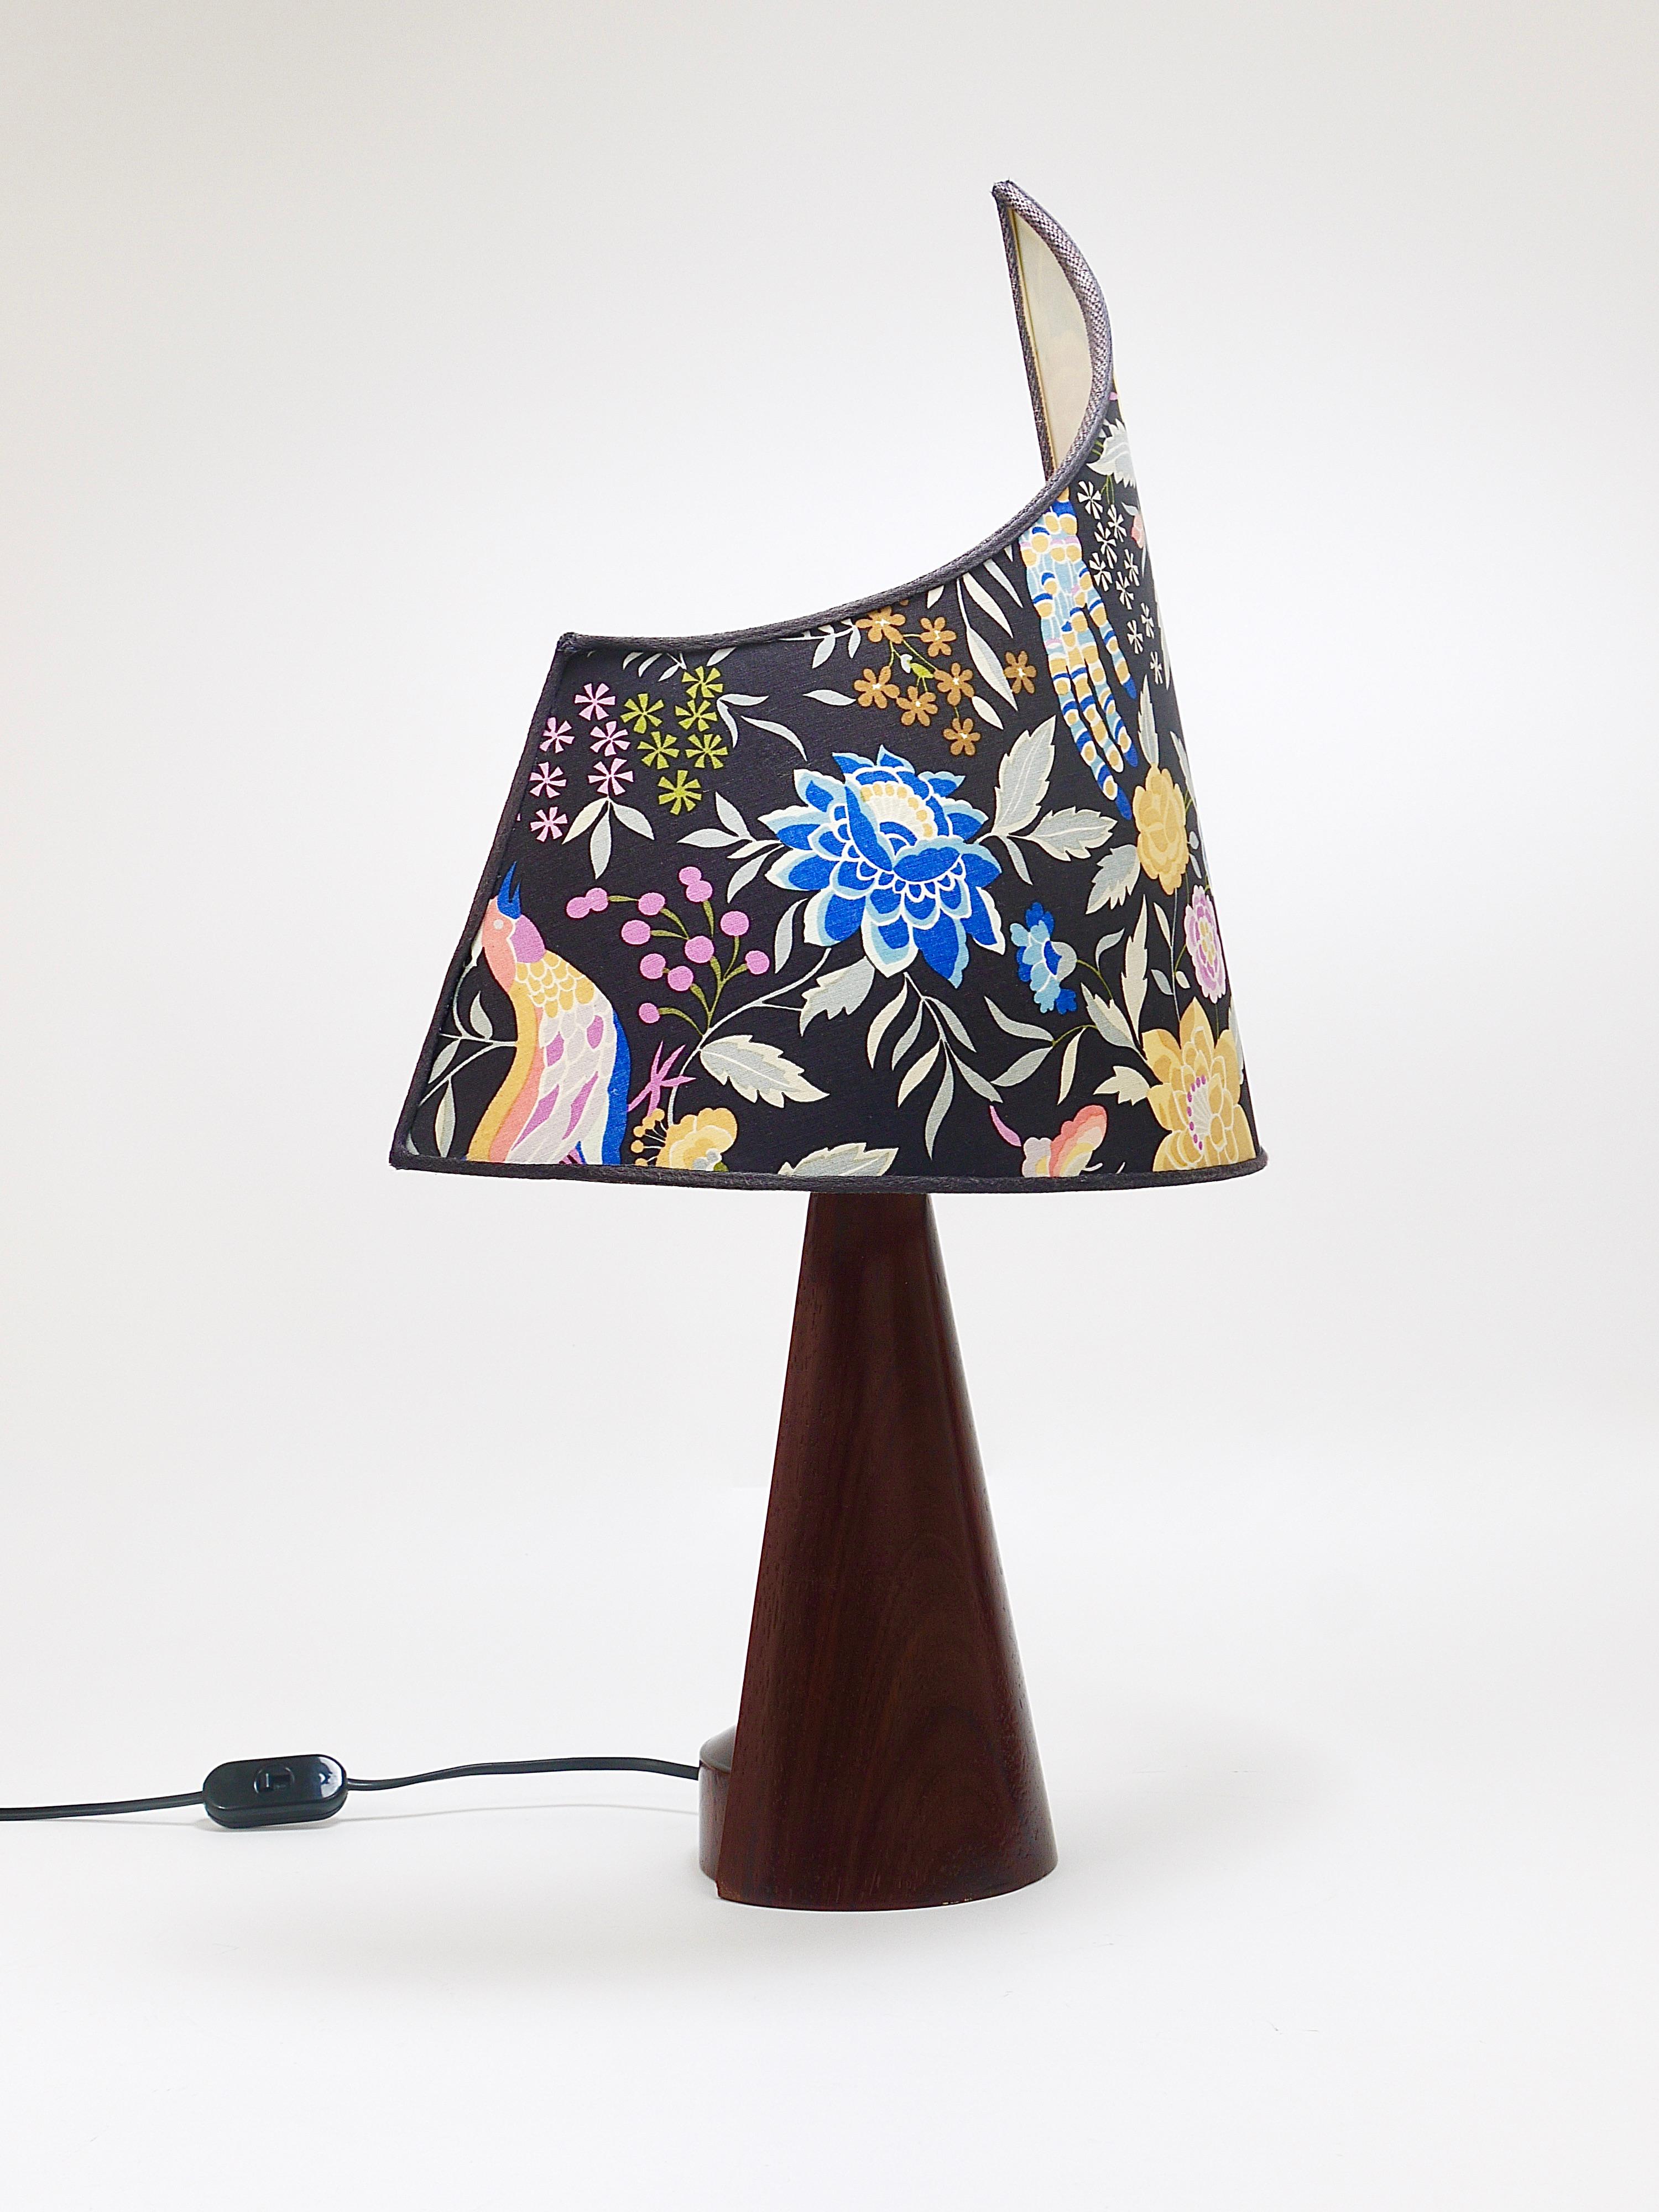 A Pair Missoni Post-Modern Table Side Lamps by Massimo Valloto, Italy, 1980s For Sale 4